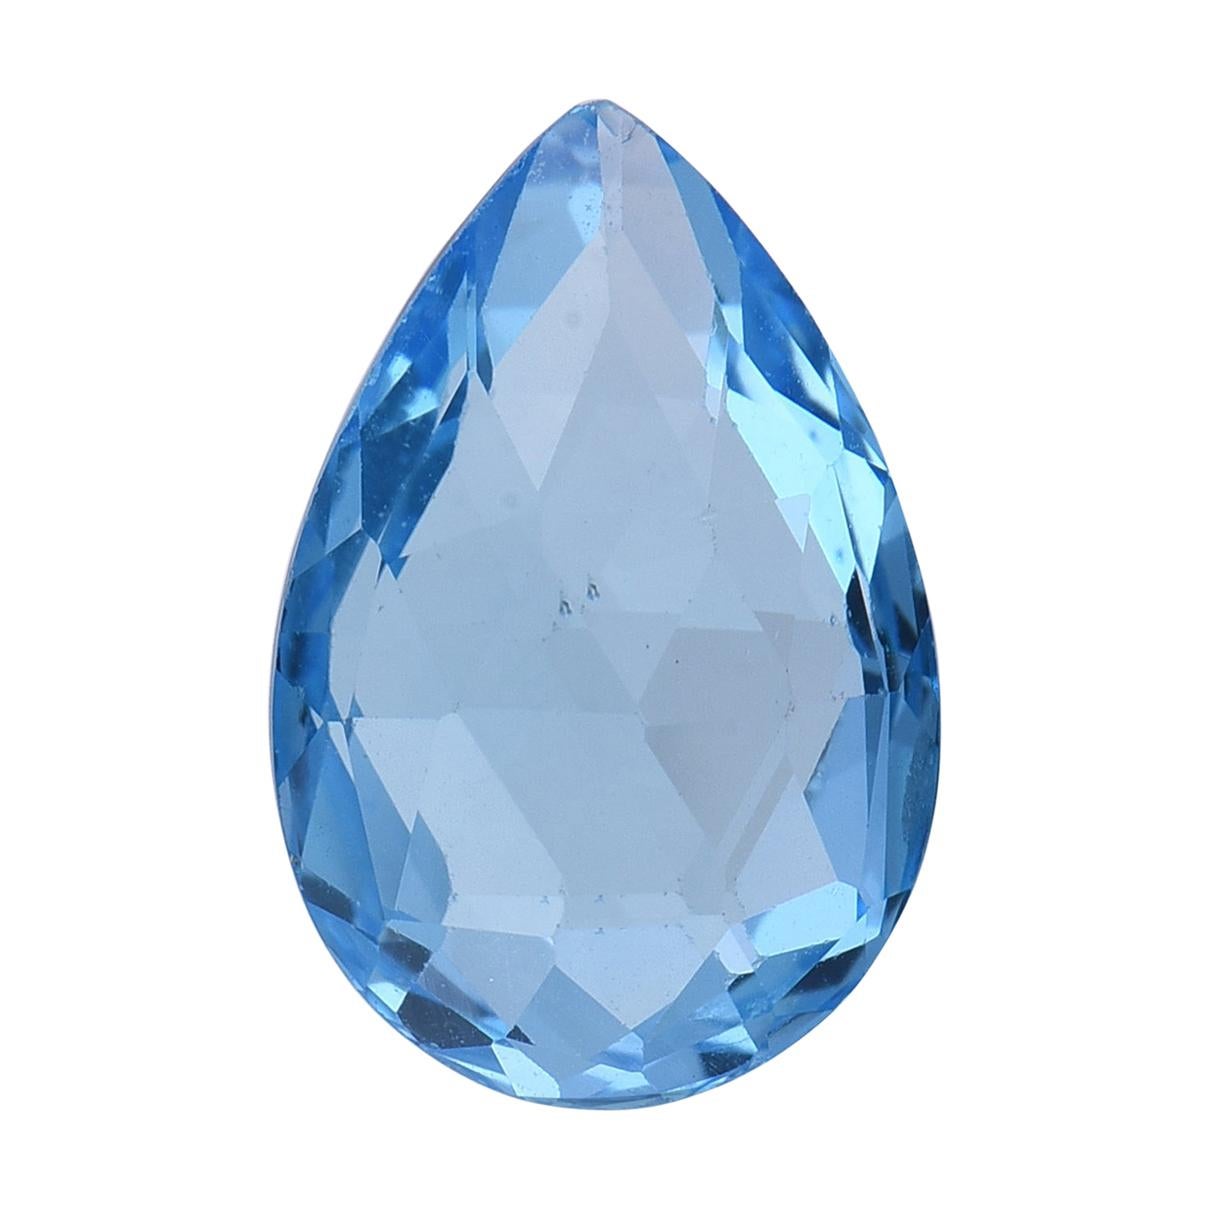 TJD Loose Natural Swiss Blue Topaz 7.26 Cts Pear Shape Gemstone for Ring/Pendant For Sale